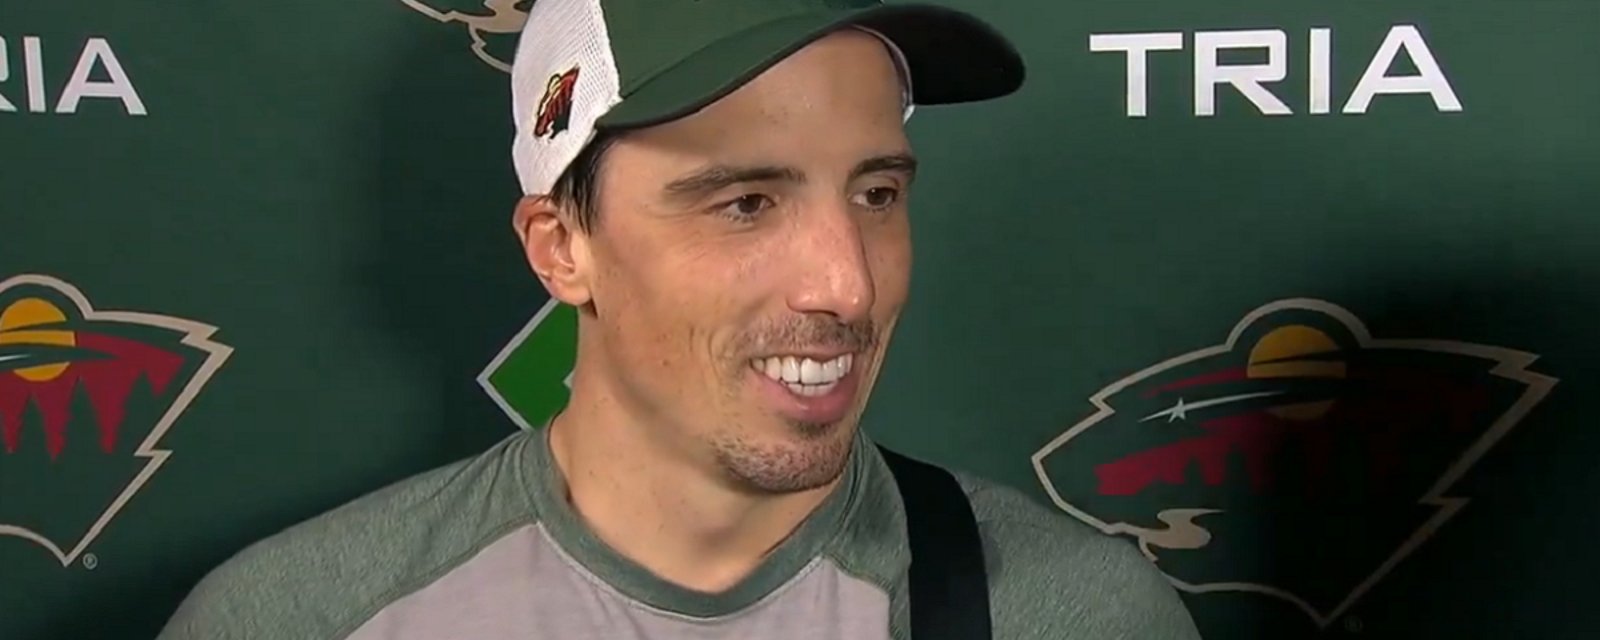 Marc-Andre Fleury praises teammates after big win in Seattle.